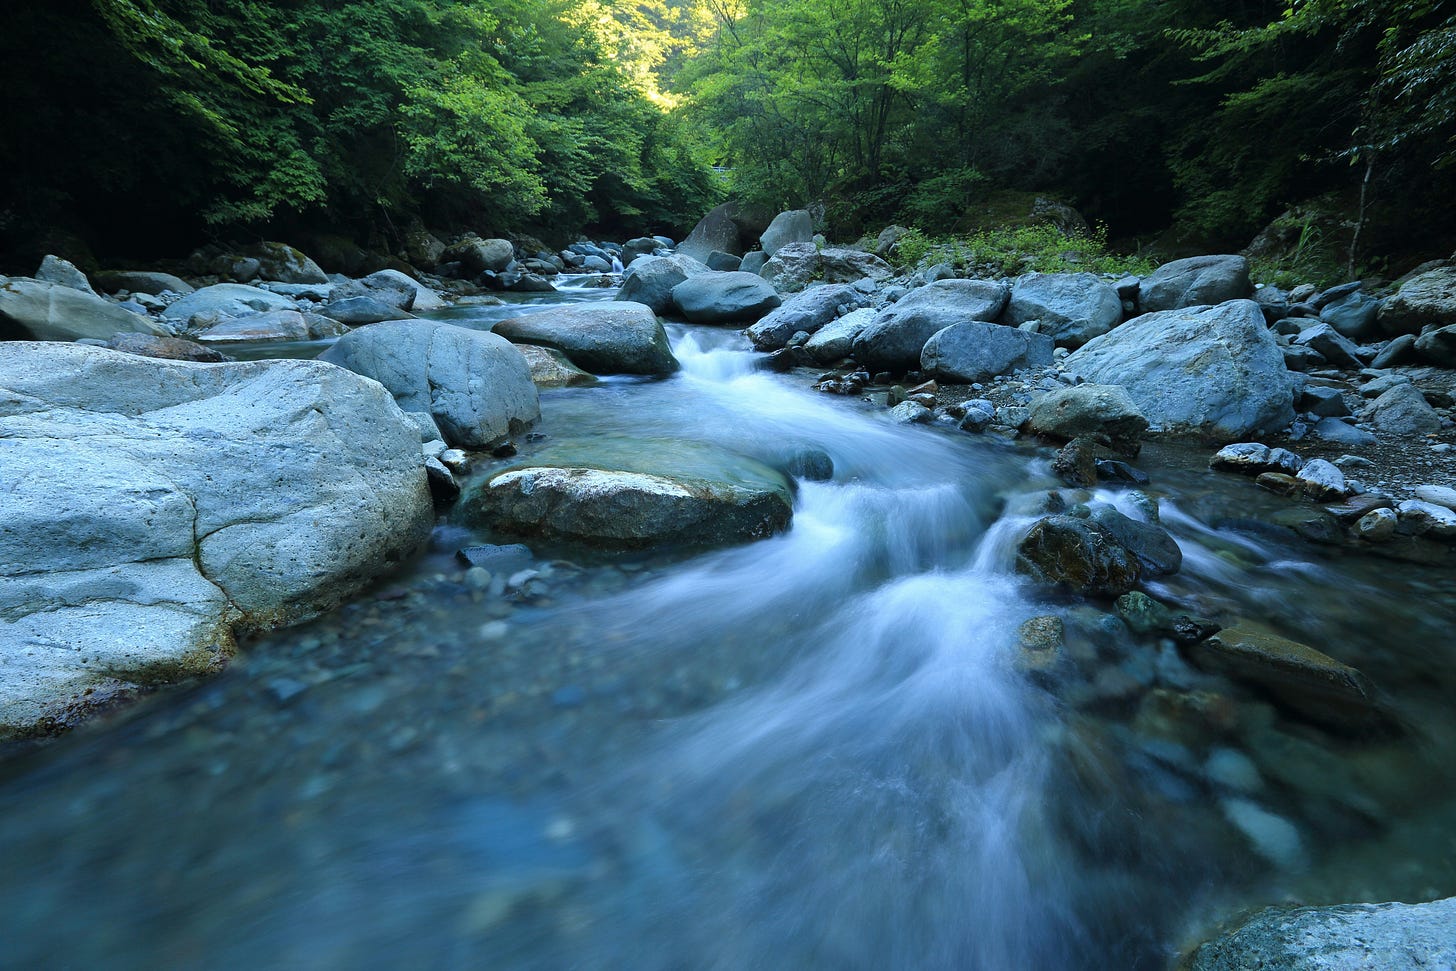 The flow of water over boulders in a river bed. Water is consistent in the path it’ll take, and yet appears to be free. [Credit: Kazuend on Unsplash]